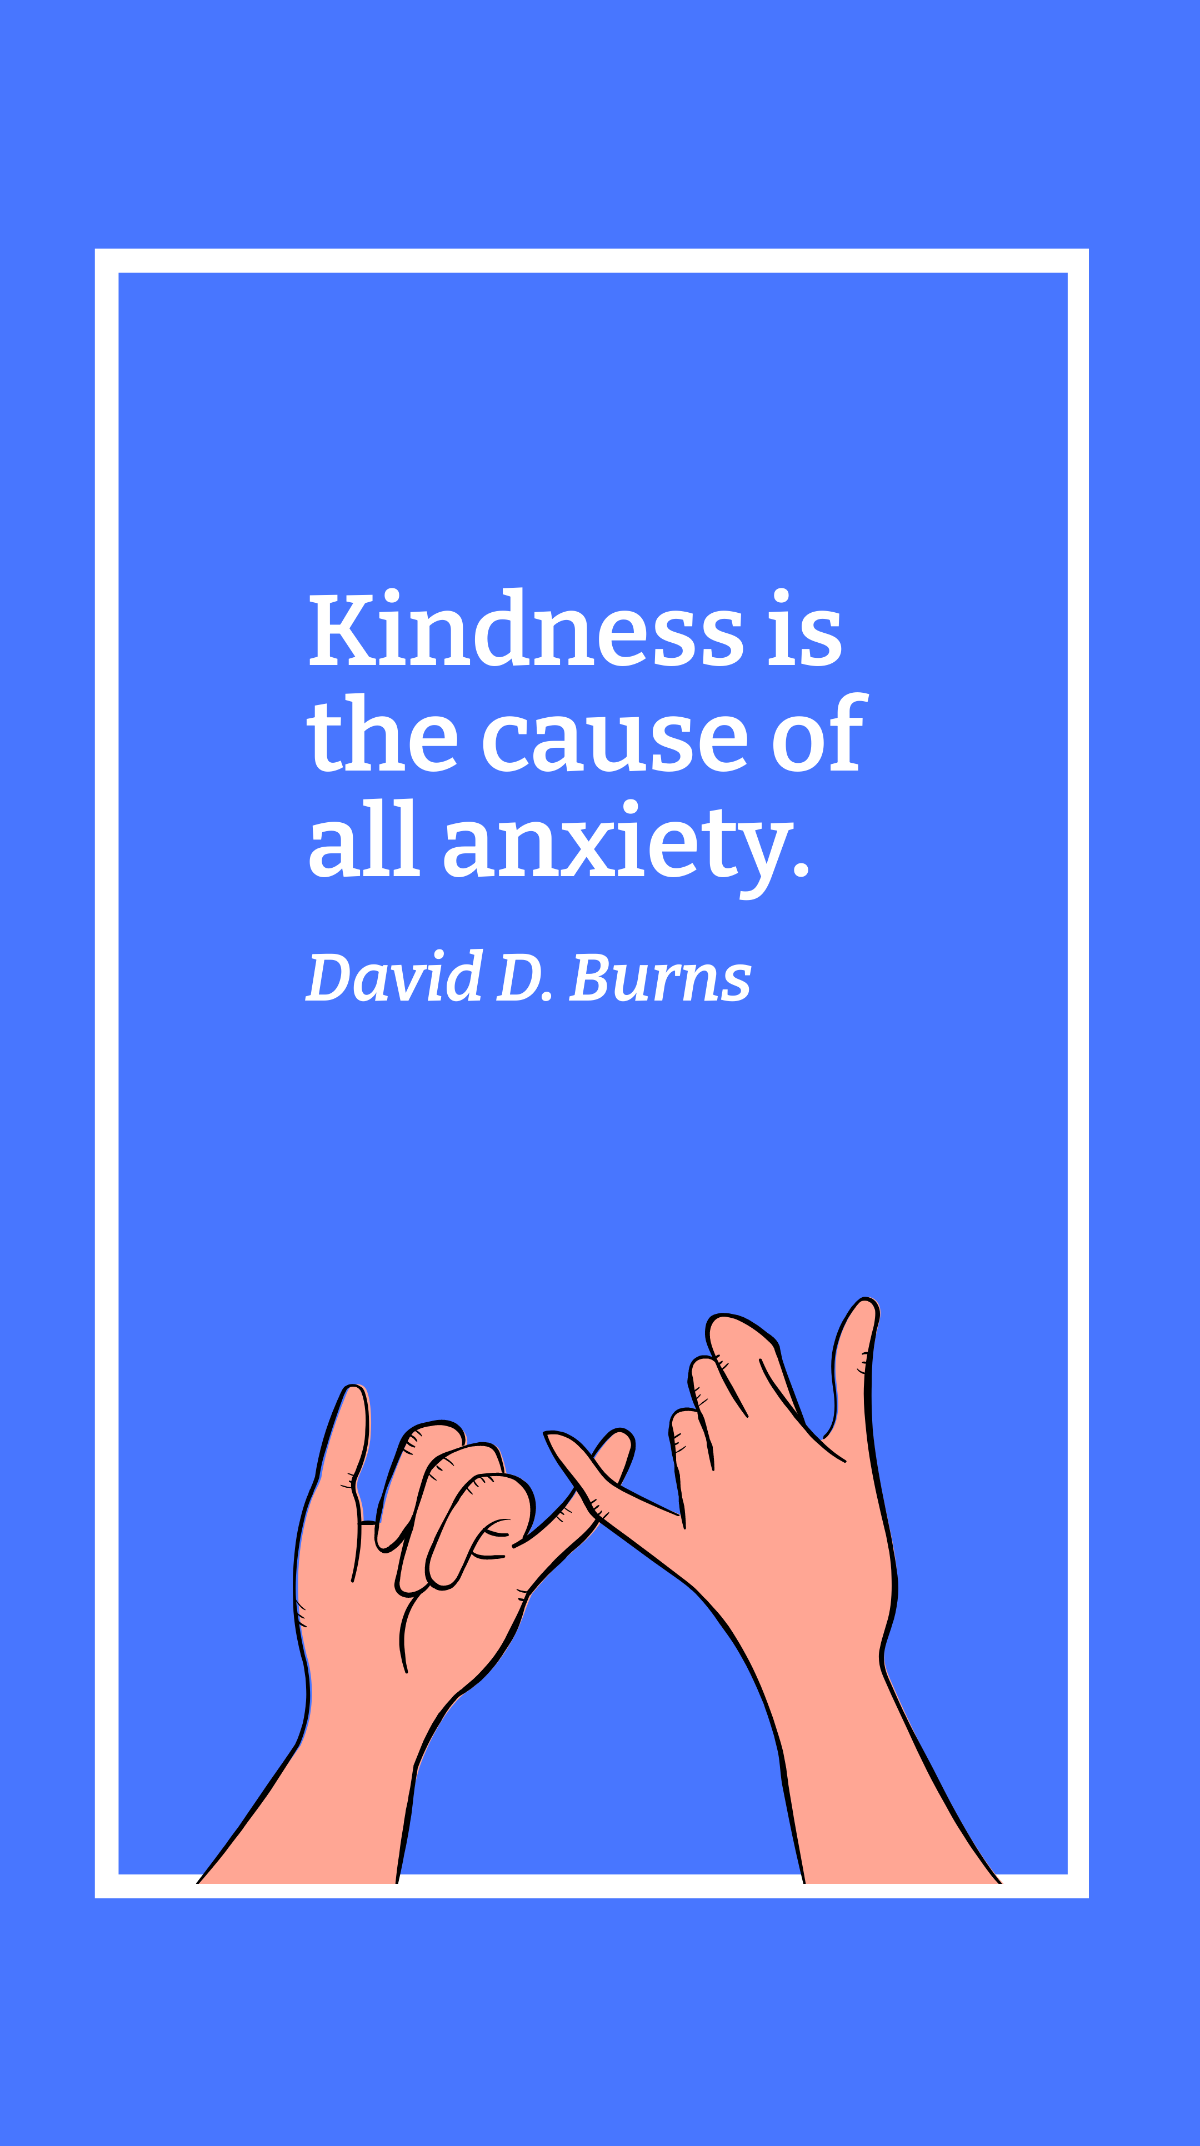 David D. Burns - Kindness is the cause of all anxiety. Template